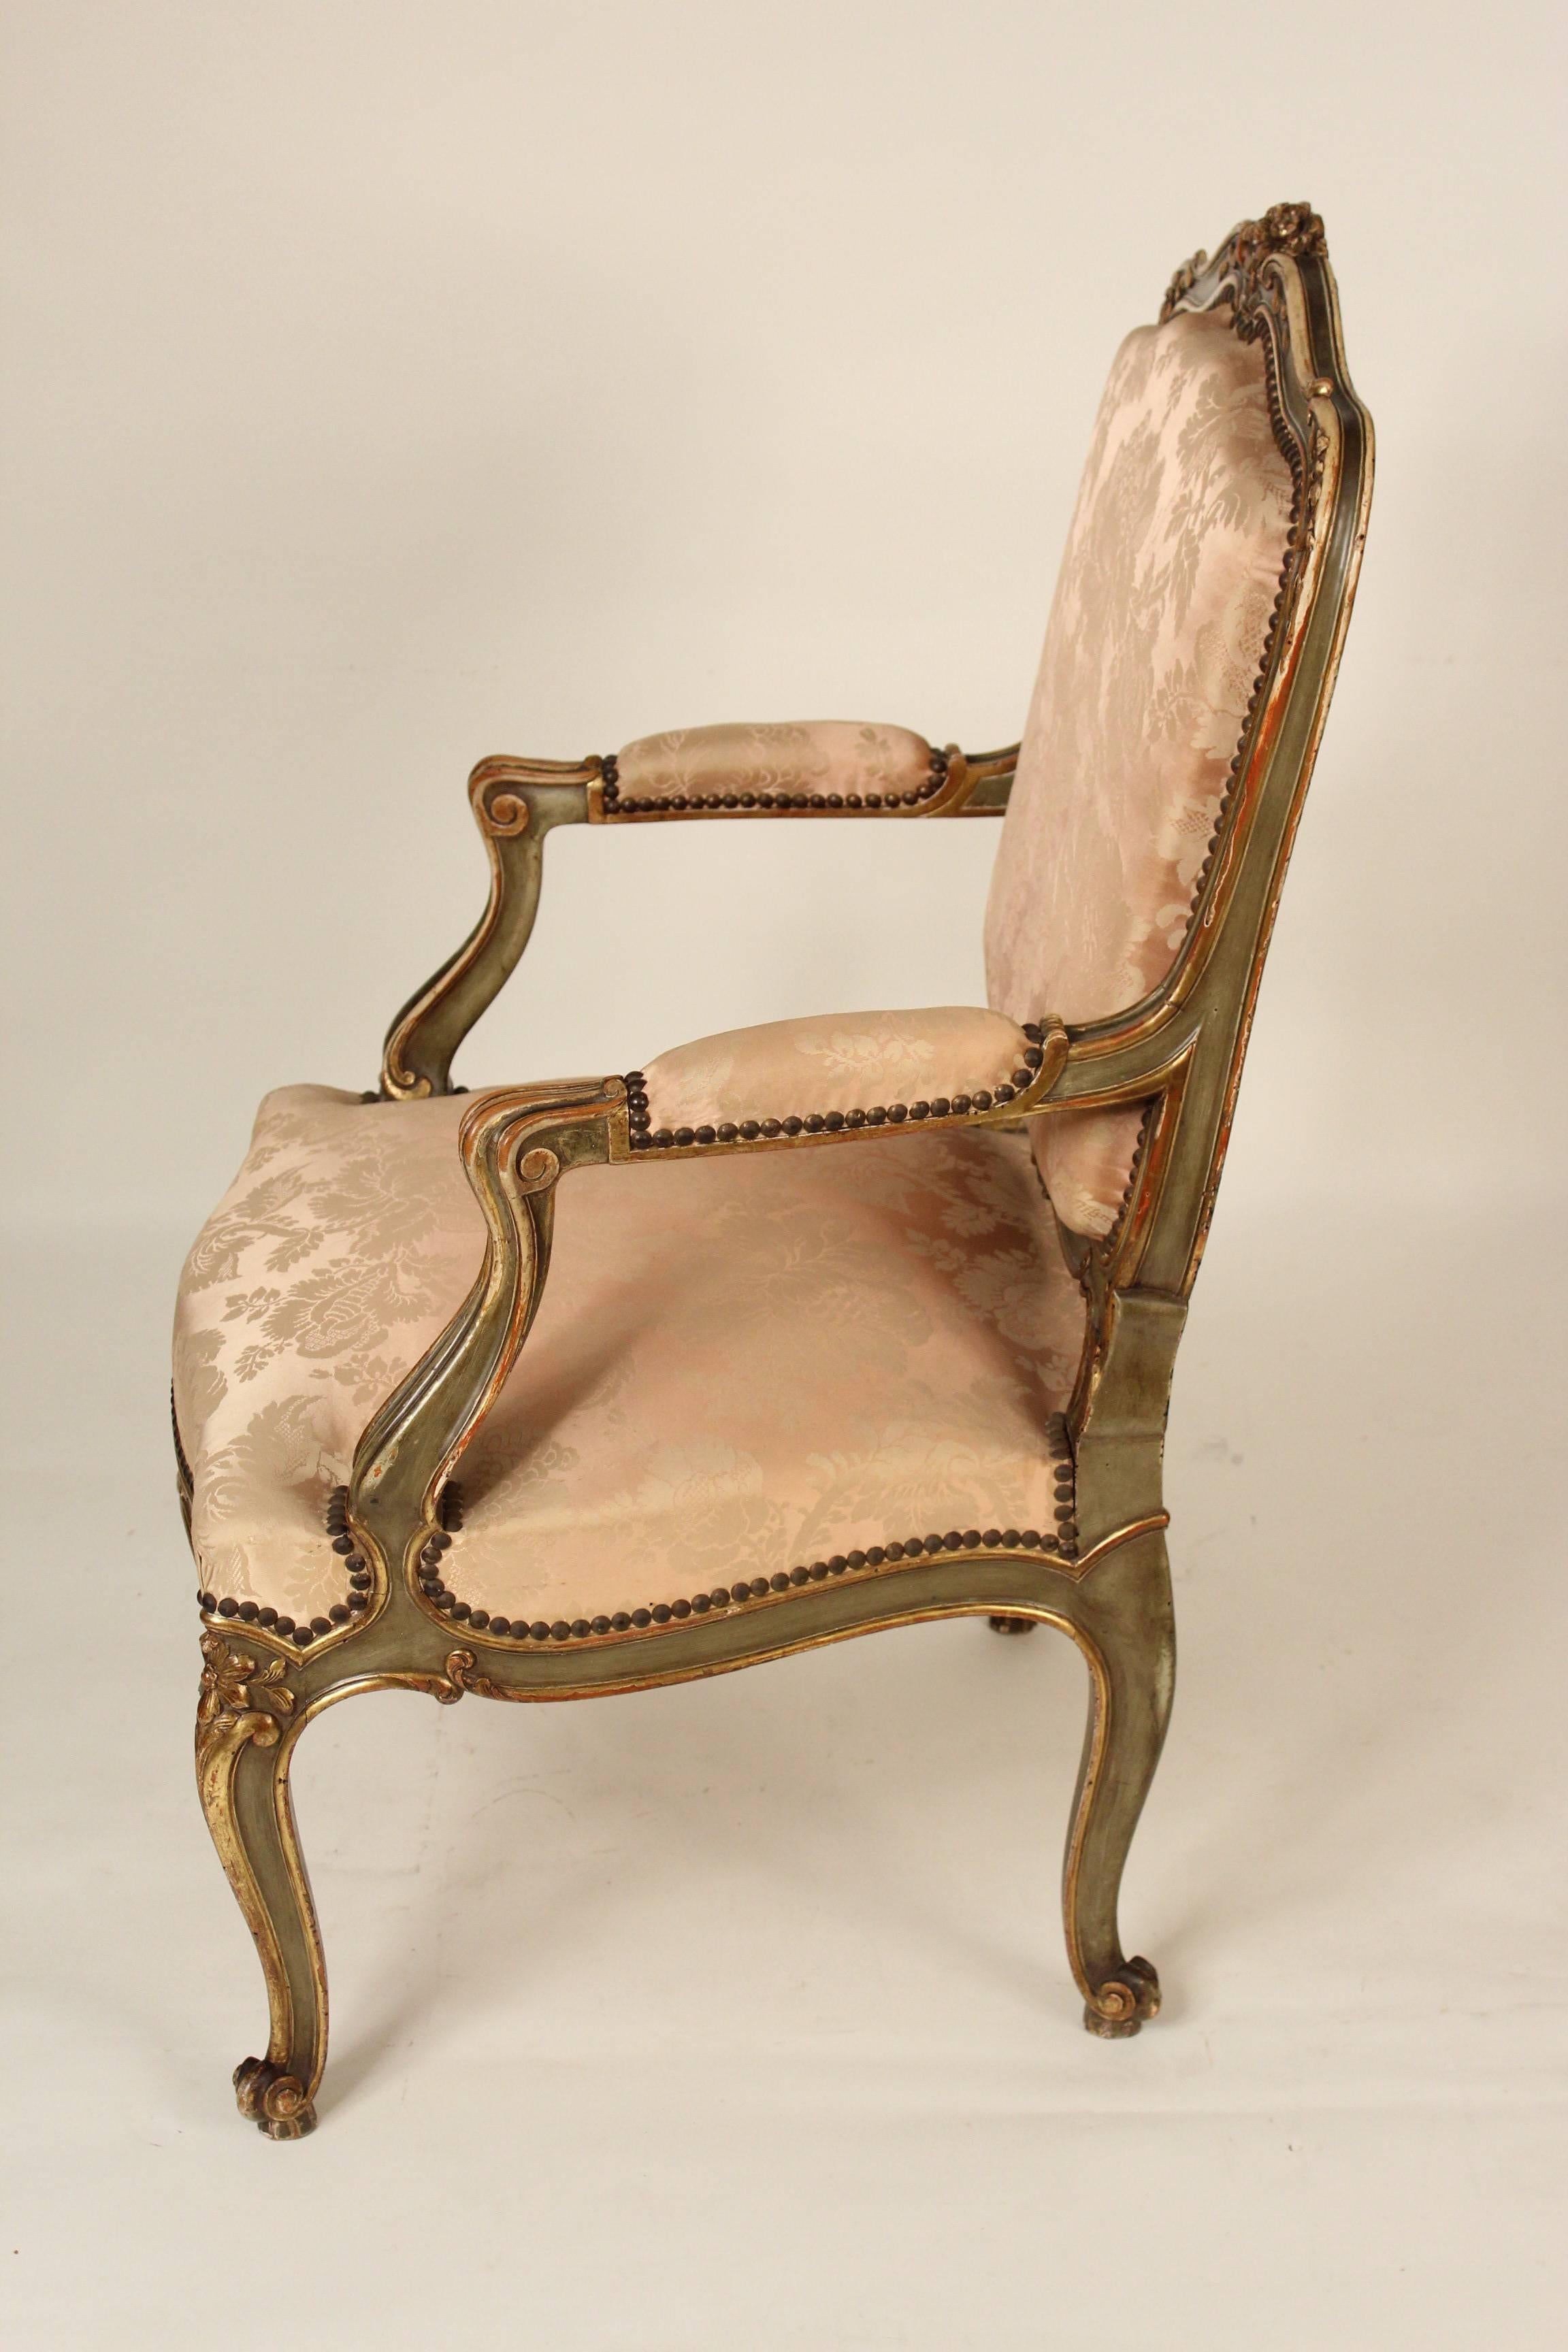 Louis XV style painted and partial gilt armchair, circa 1910. This chair has a very nice quality original gold leaf and painted finish. Very minor old inactive worming.